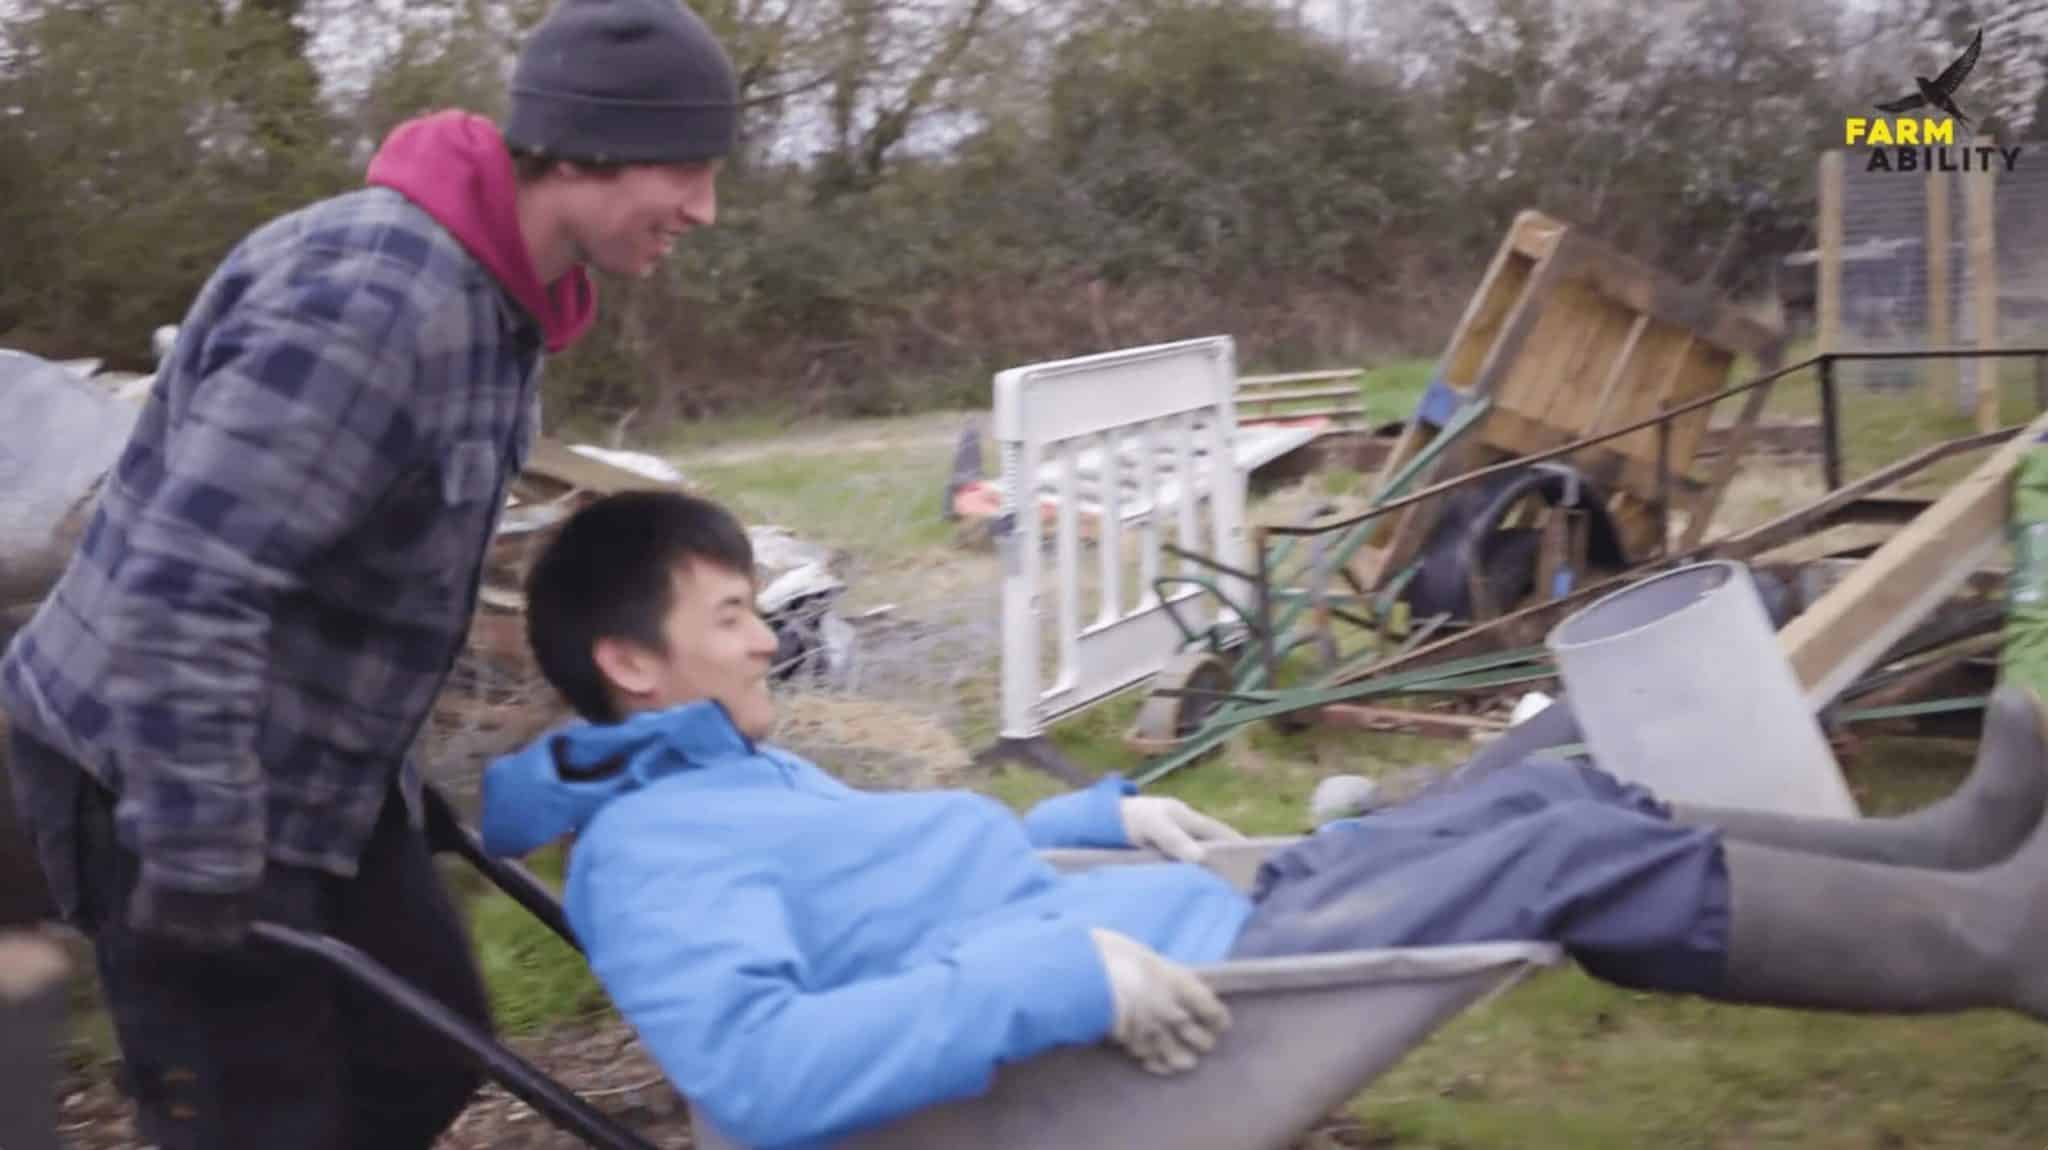 one person pushing another in a wheelbarrow